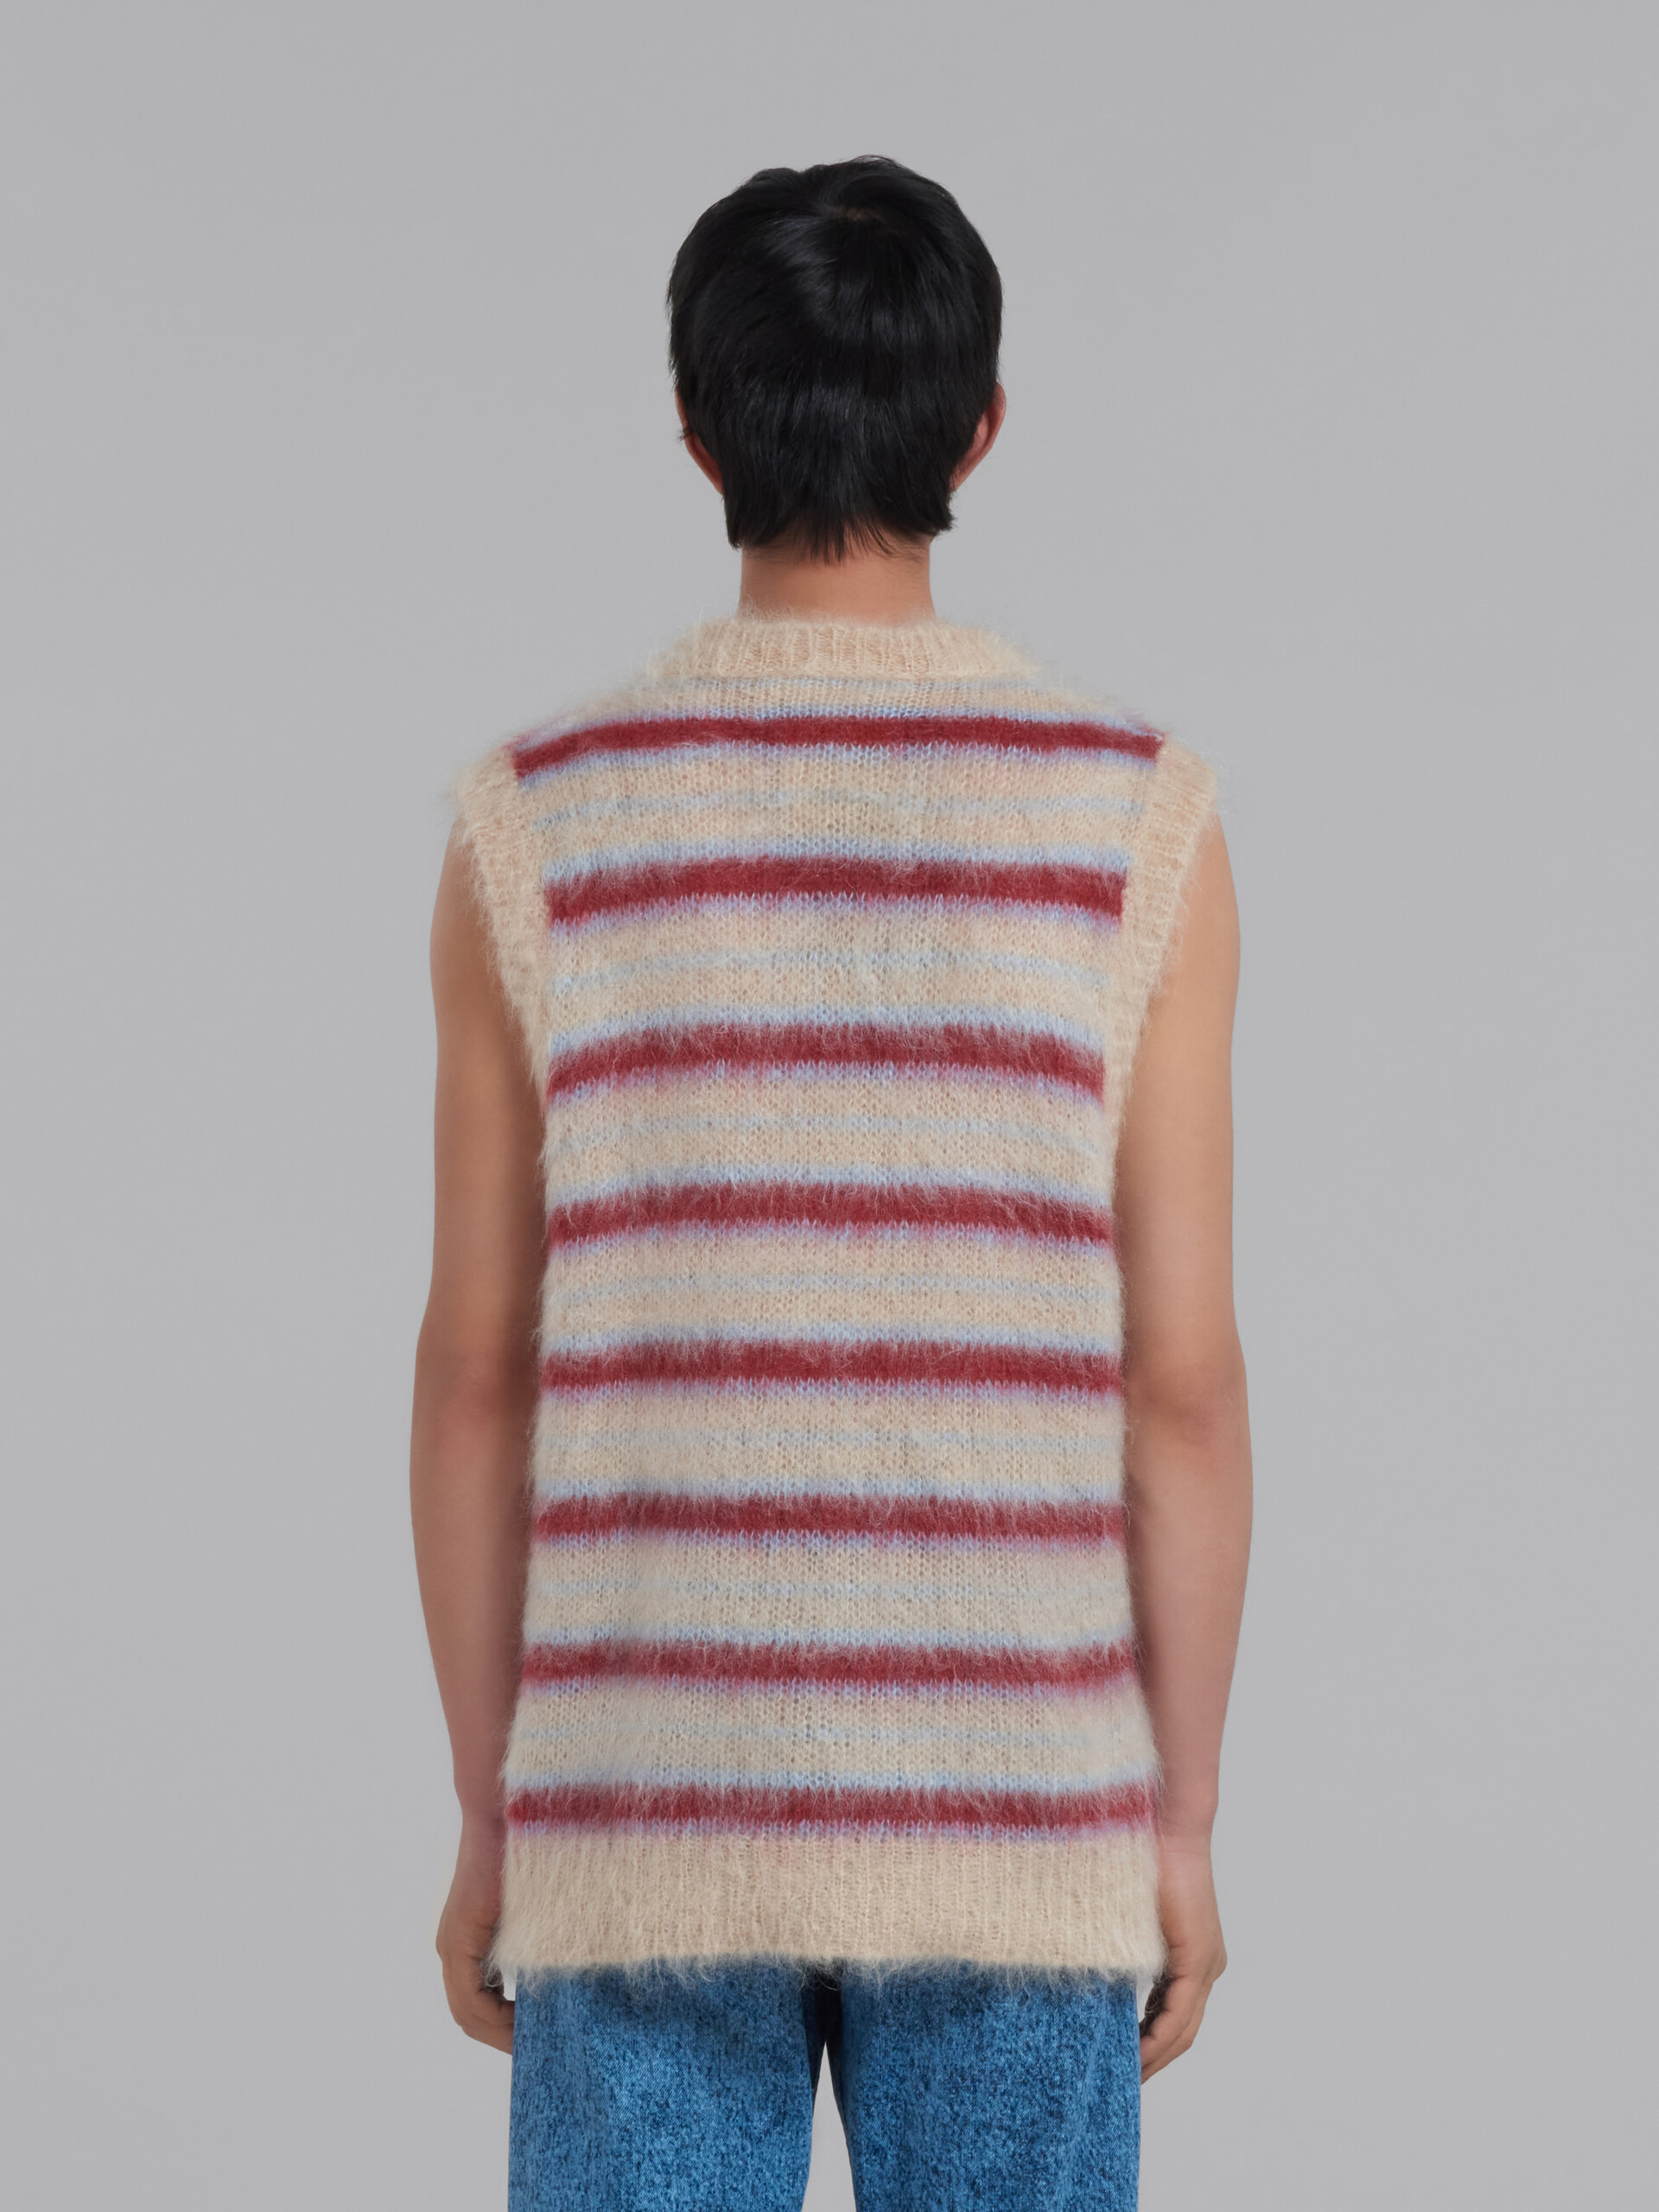 Cream striped mohair vest - Pullovers - Image 3